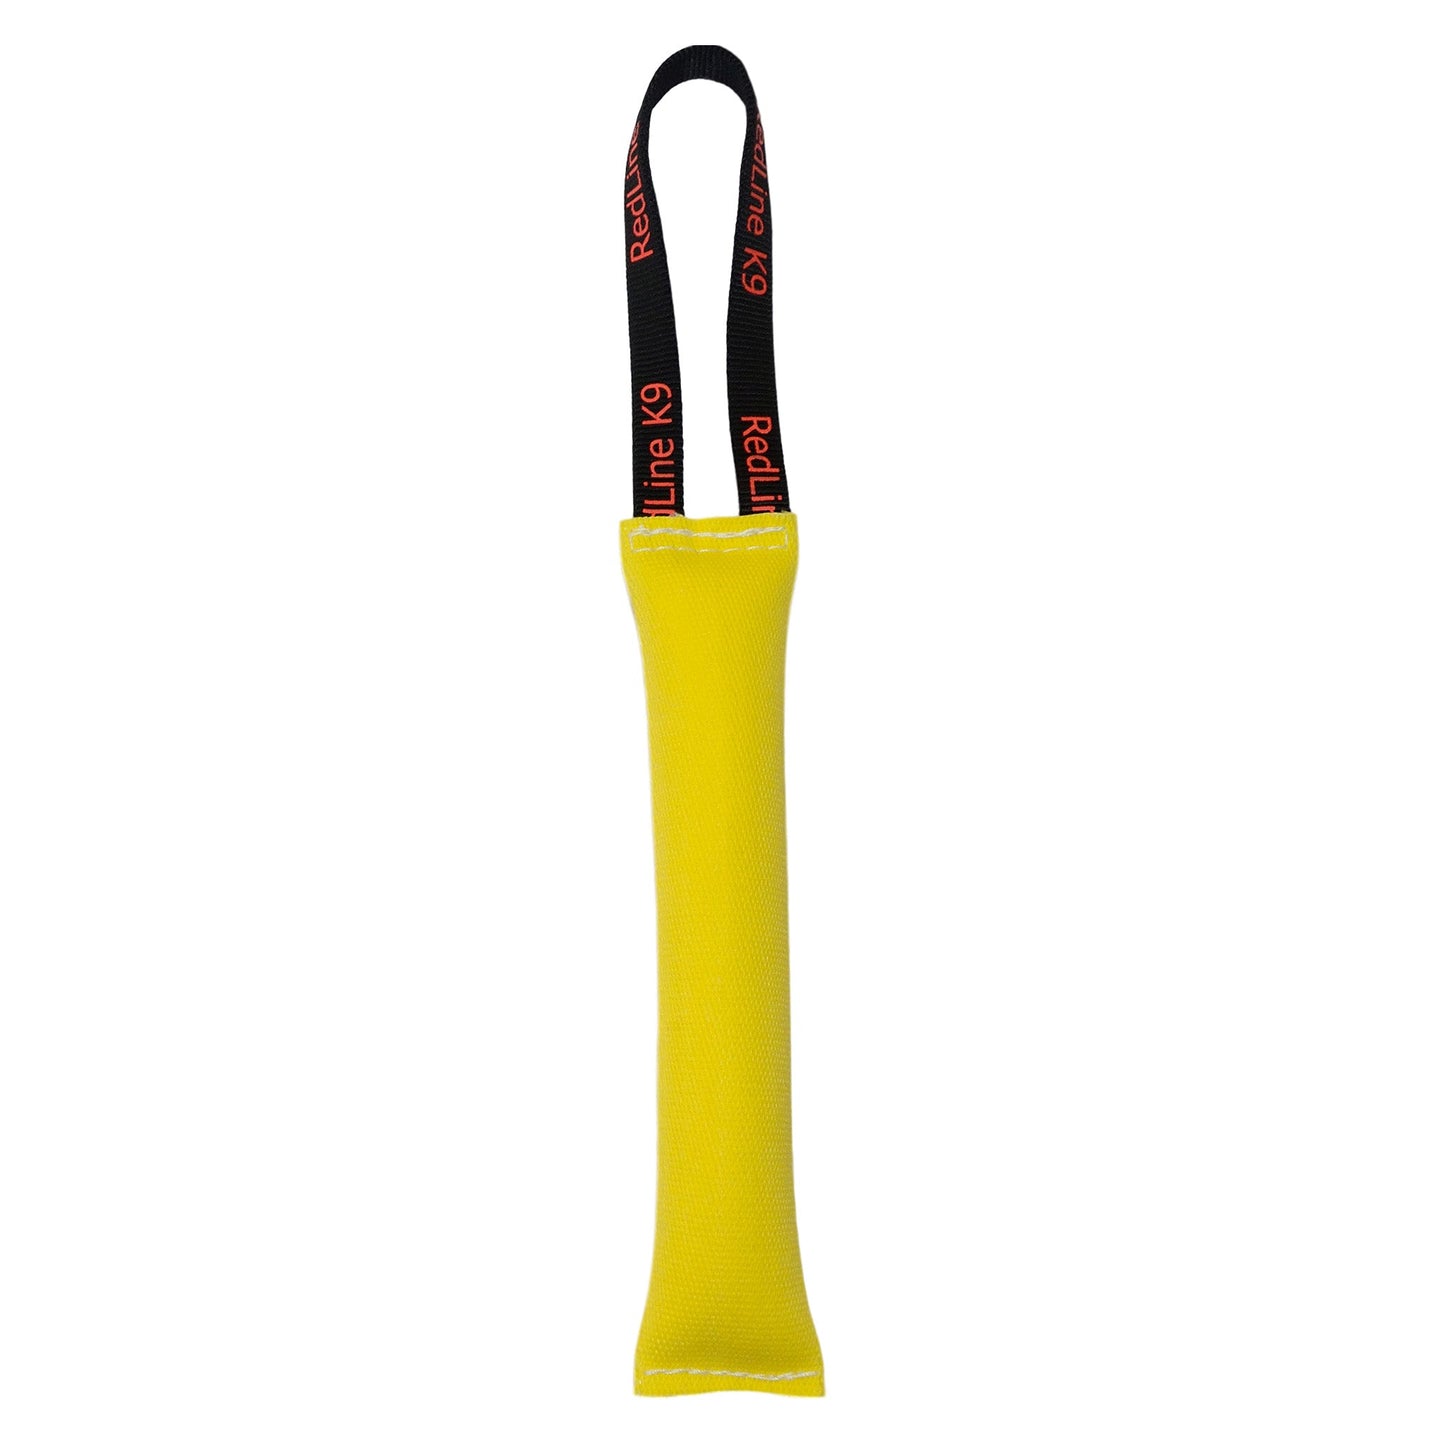 Yellow Floating Fire Hose Tug Toy